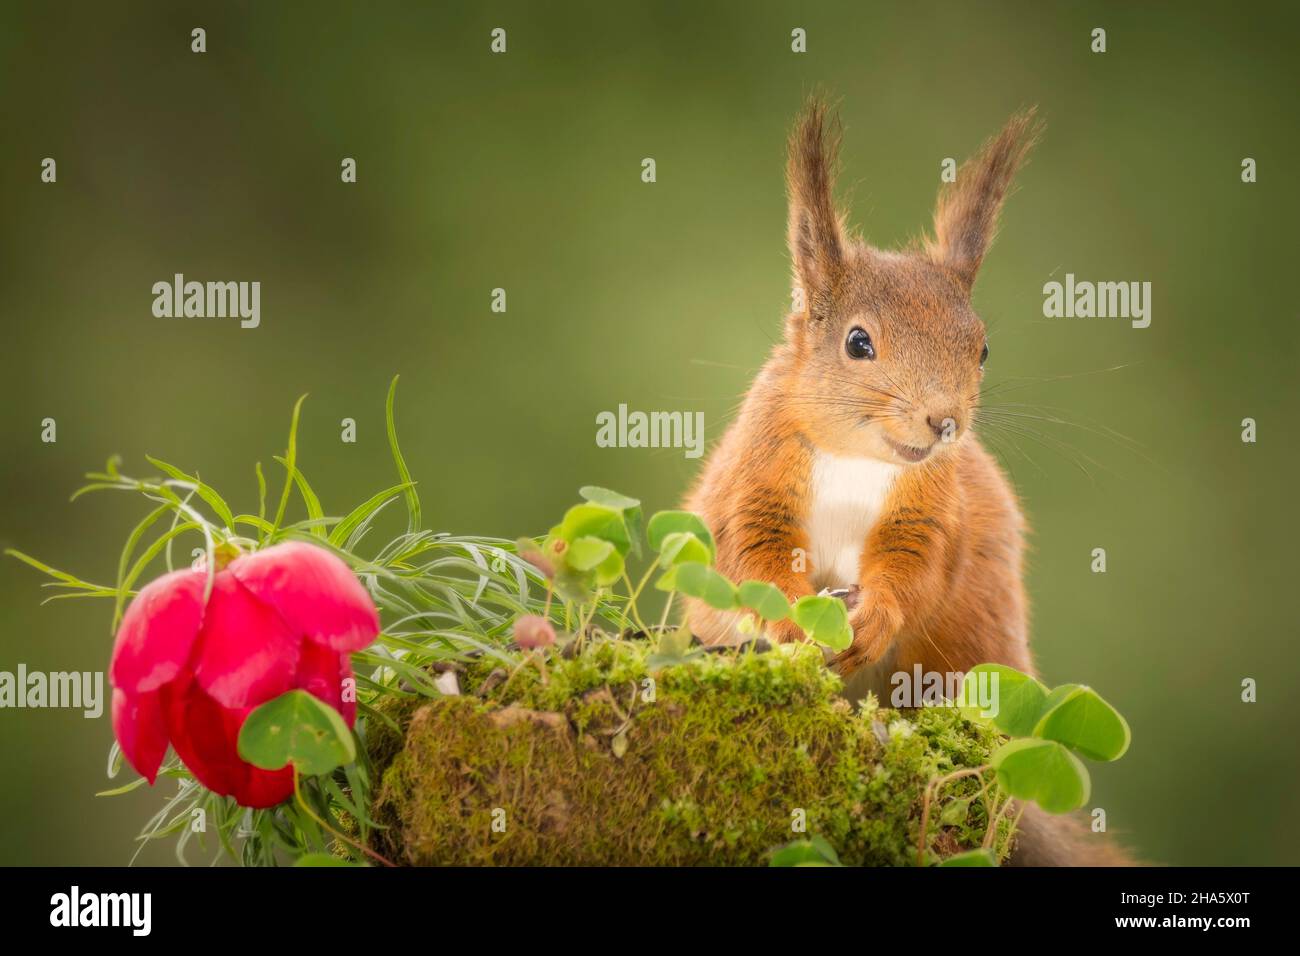 red squirrel with a happy face standing with red flower Stock Photo